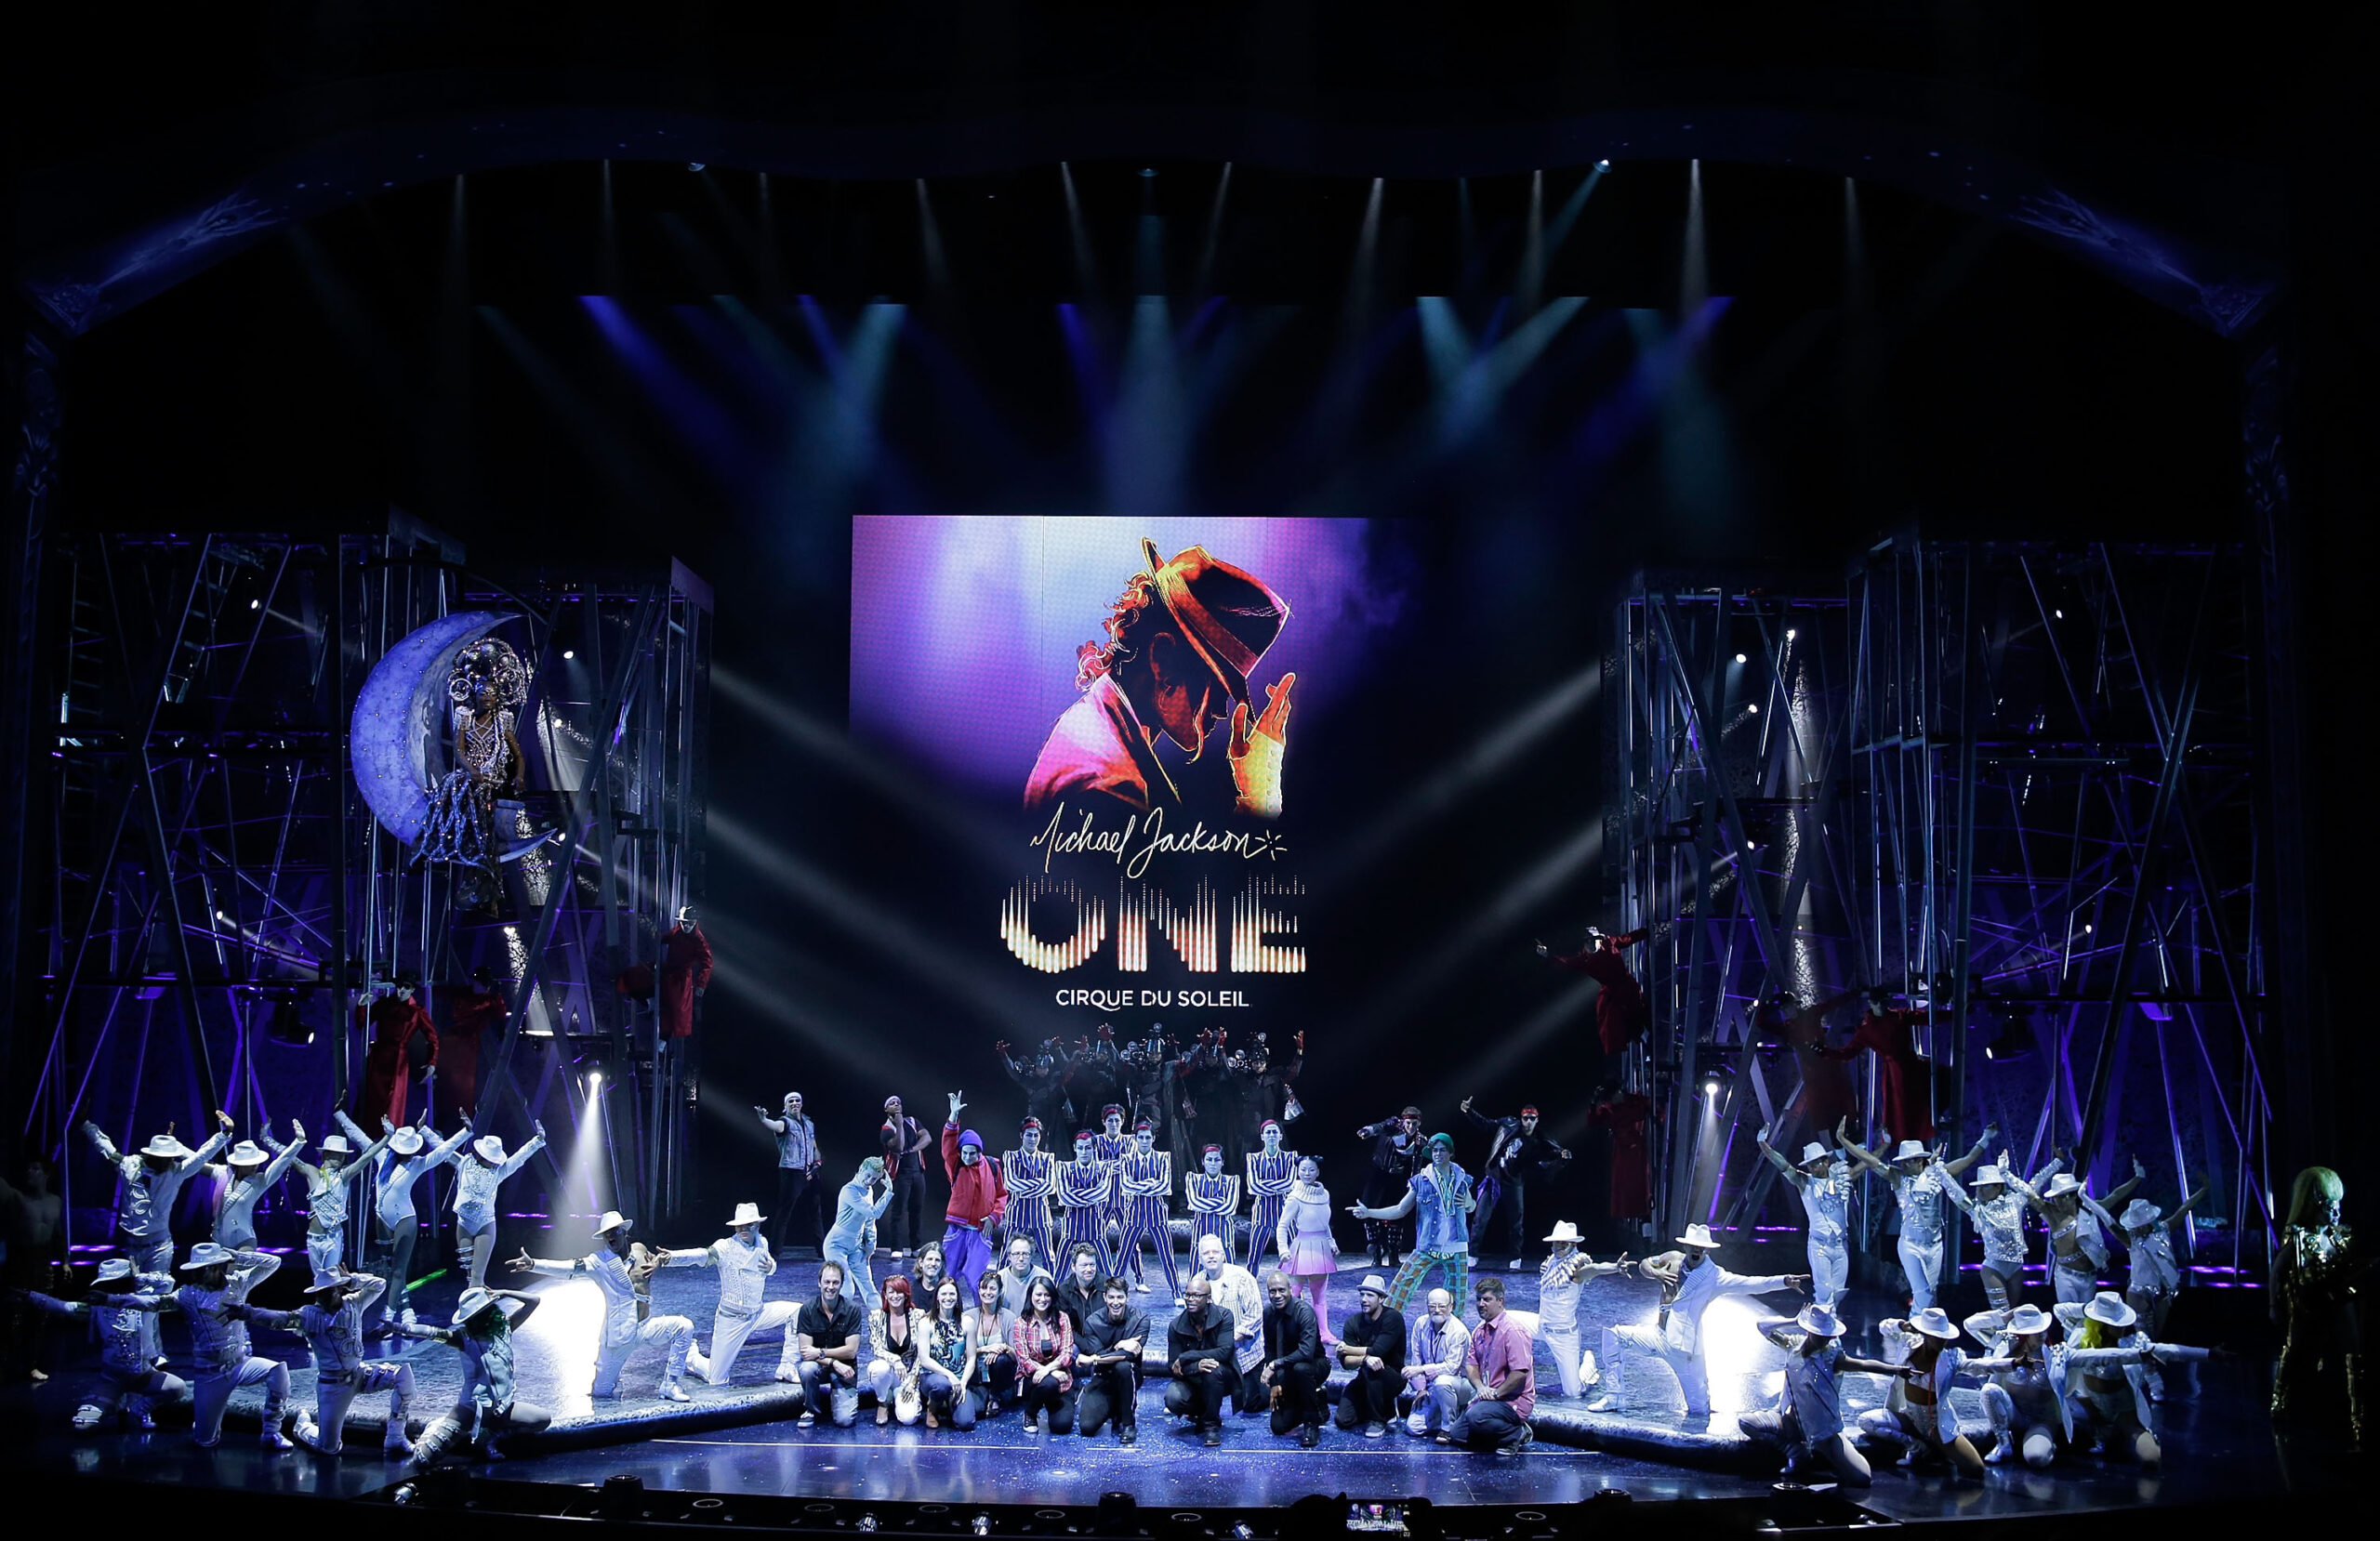 Michael Jackson ONE Theatre at Mandalay Bay for Cirque du Soleil